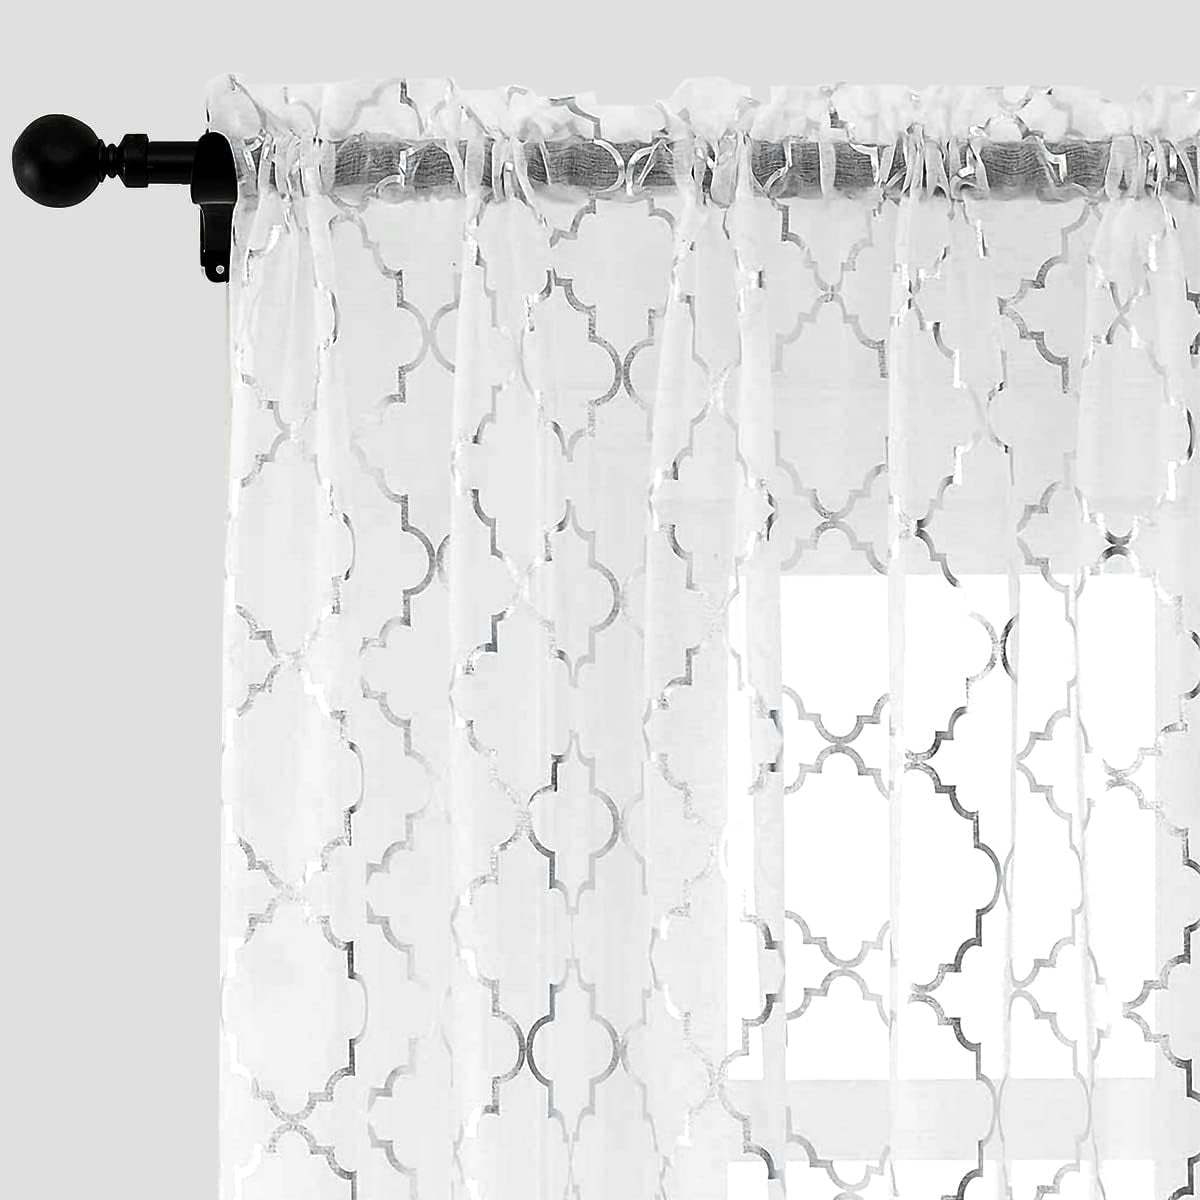 Kotile Silver Grey Sheer Curtains 96 Inch - Metallic Silver Foil Moroccan Tile Printed Rod Pocket Privacy Light Filtering Curtains for Living Room, 52 X 96 Inches, 2 Panels, Grey and Silver  Kotile Textile .White And Silver W52" X L108" 